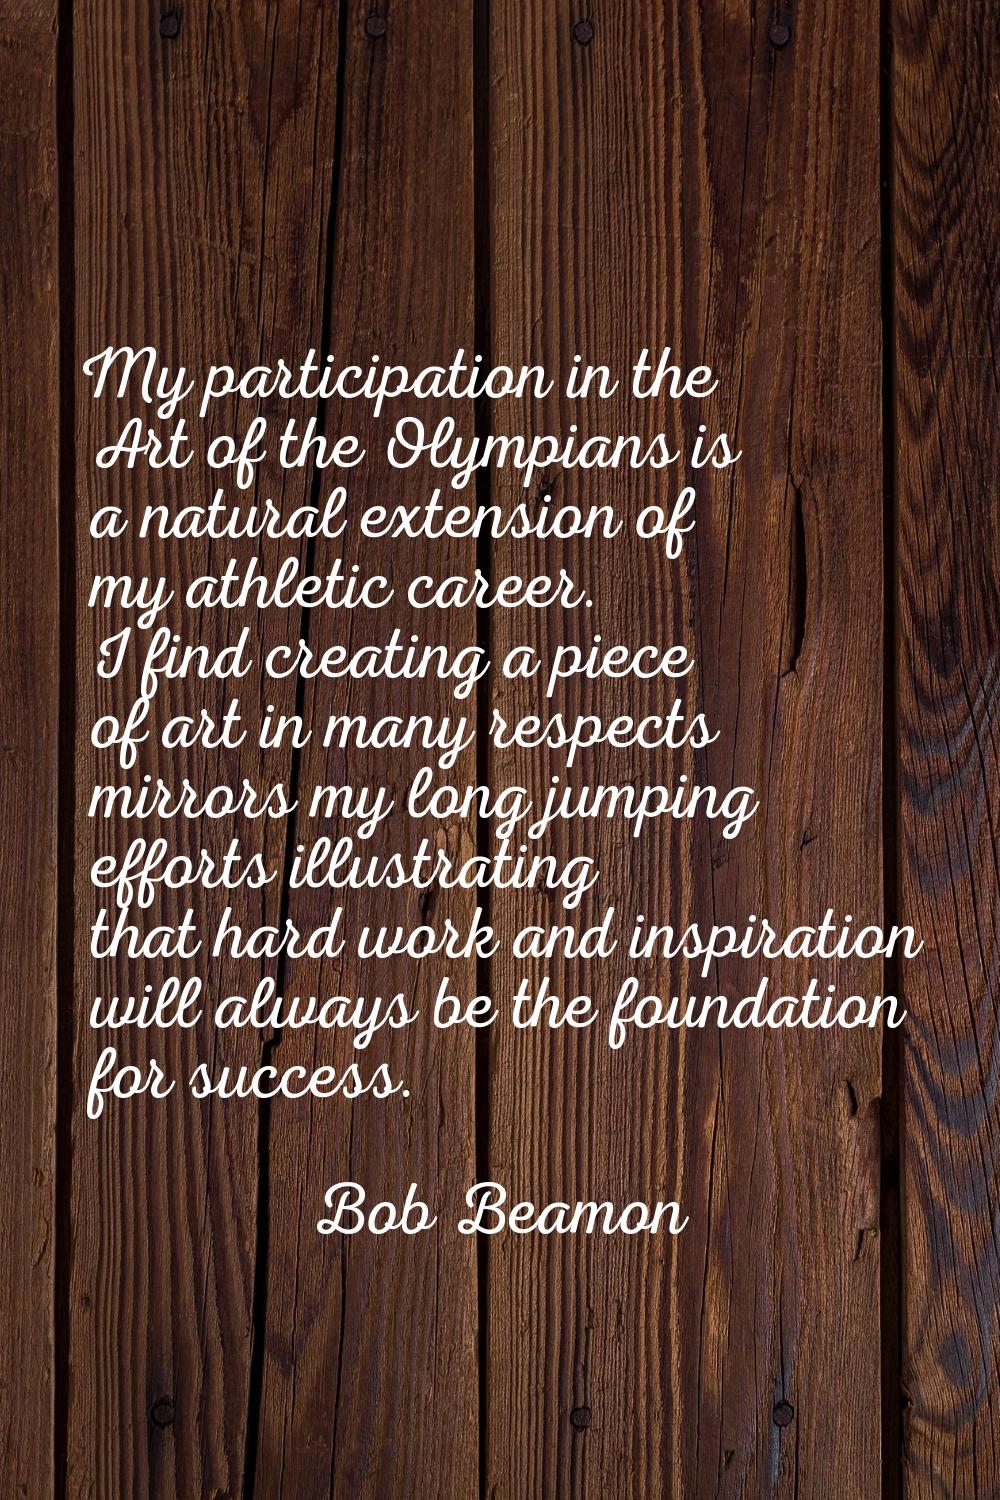 My participation in the Art of the Olympians is a natural extension of my athletic career. I find c